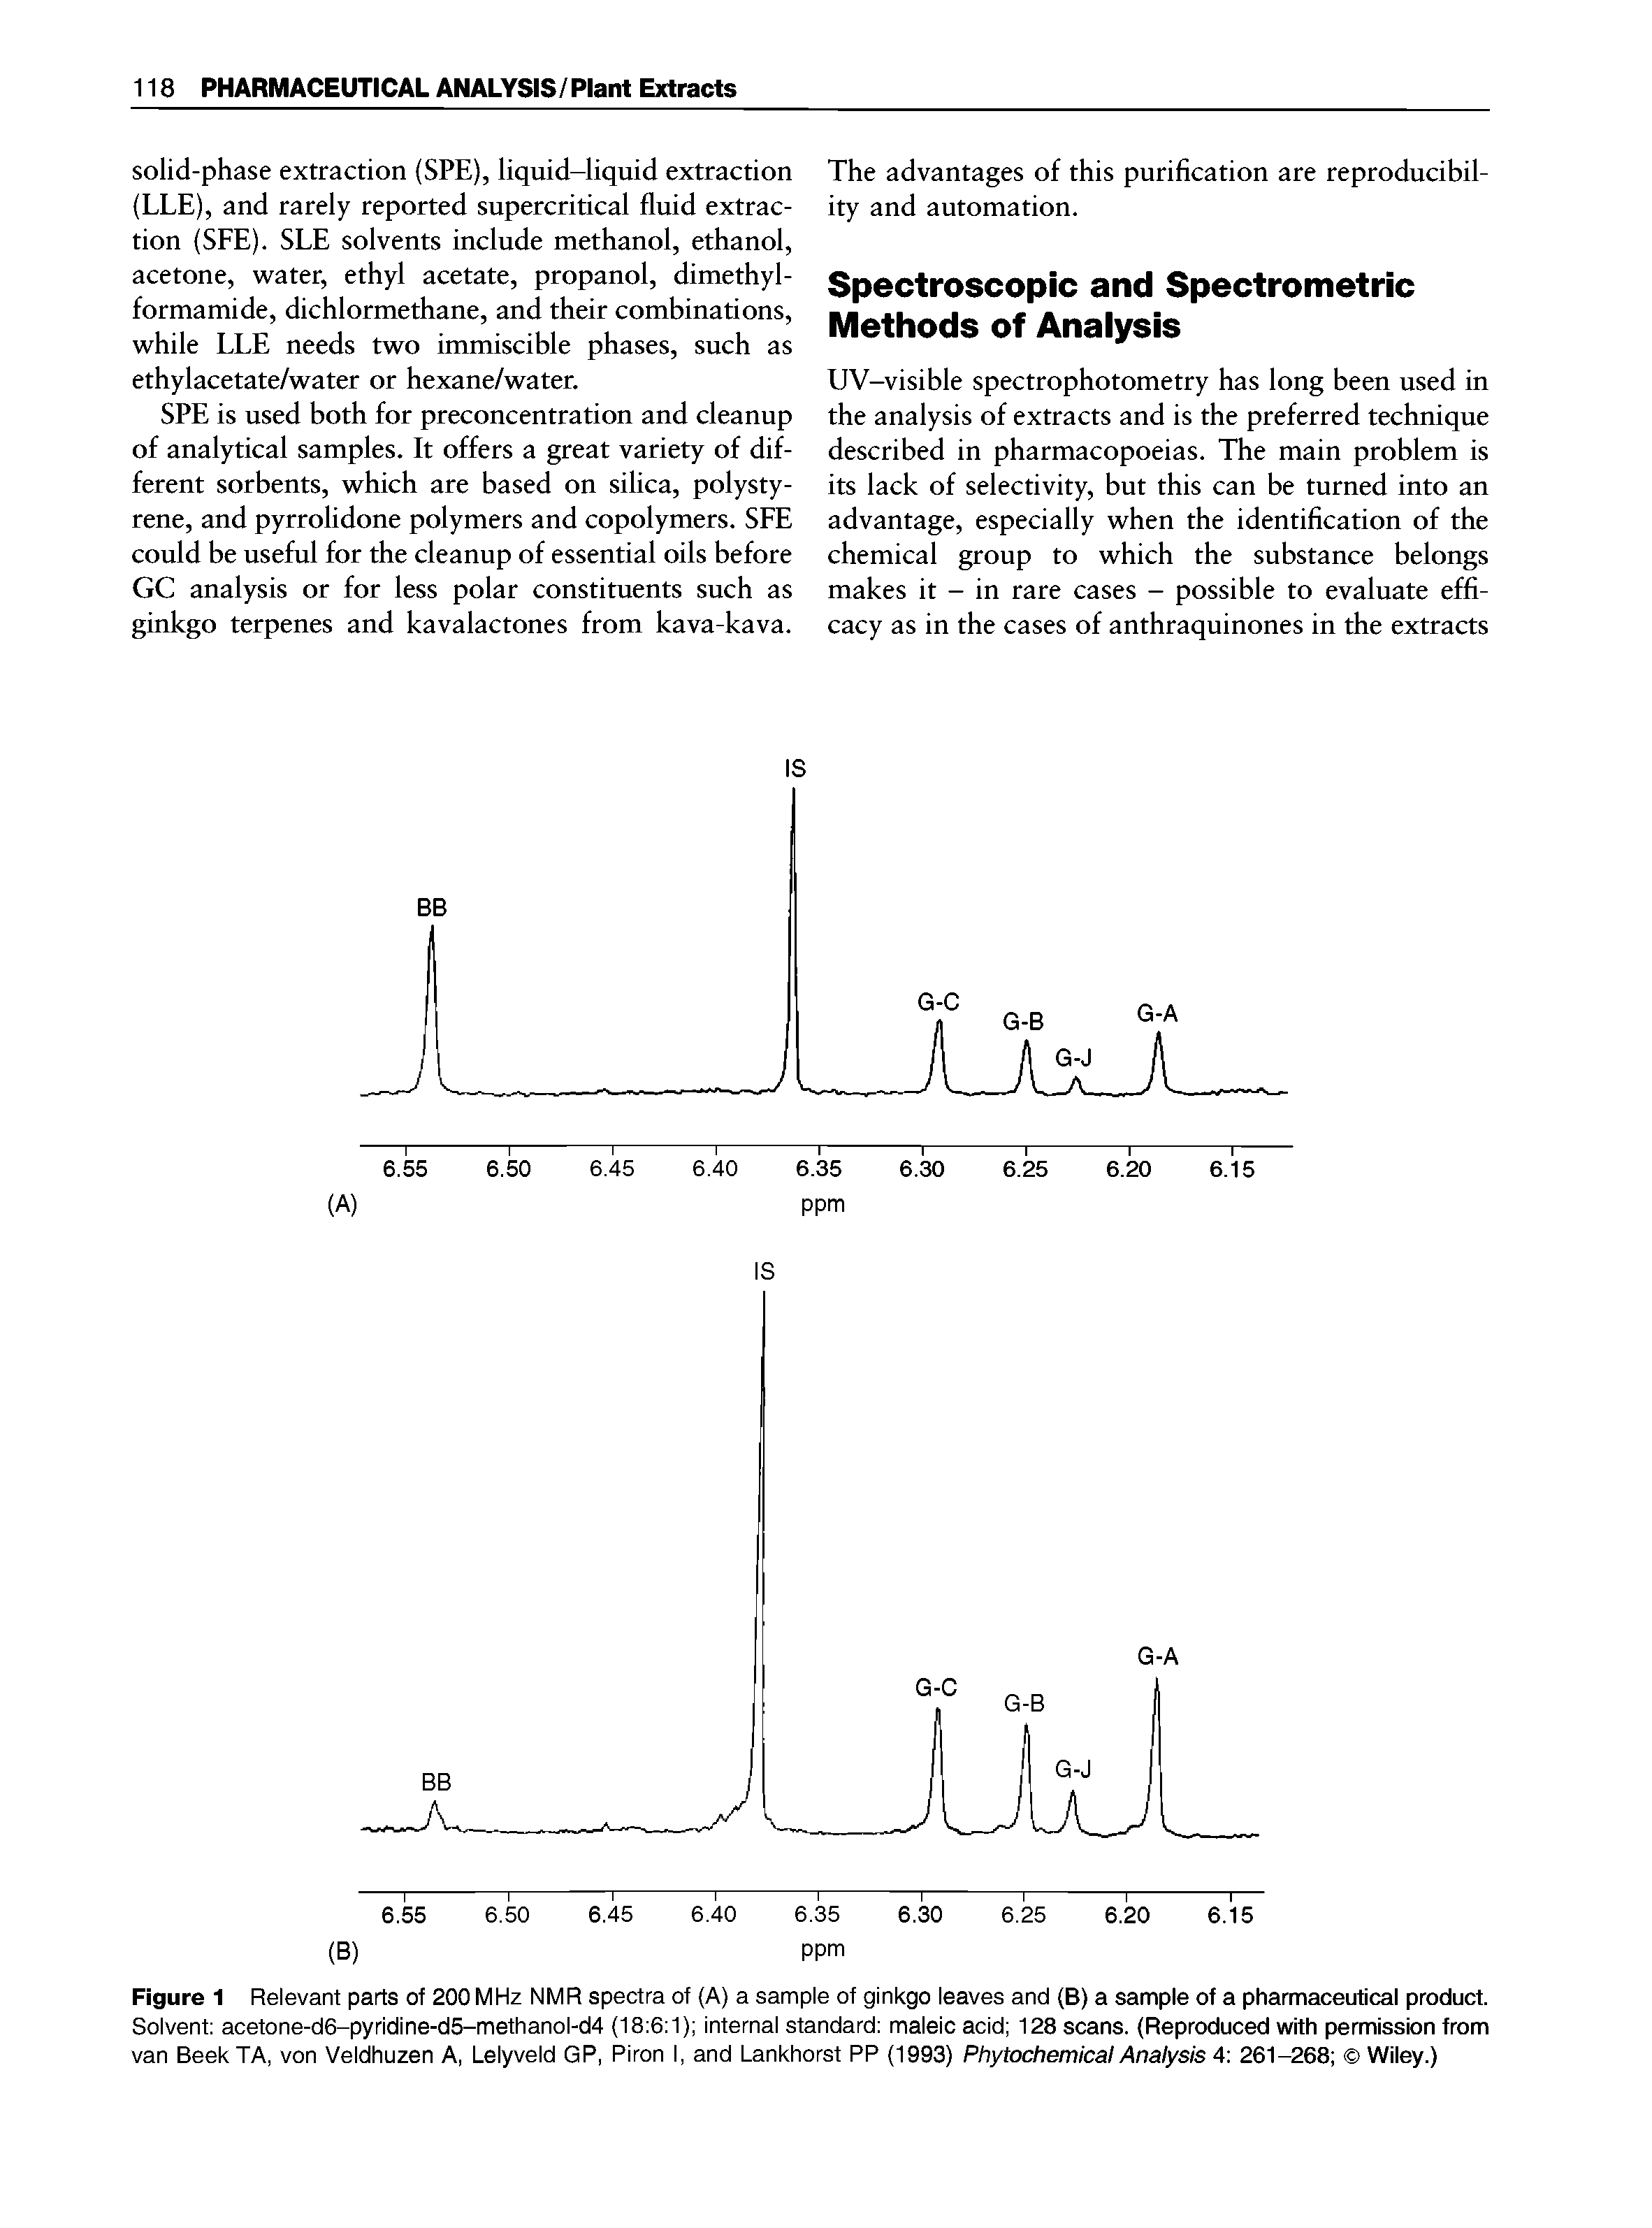 Figure 1 Relevant parts of 200 MHz NMR spectra of (A) a sample of ginkgo leaves and (B) a sample of a pharmaceutical product. Solvent acetone-d6-pyridine-d5-methanol-d4 (18 6 1) internal standard maleic acid 128 scans. (Reproduced with permission from van Beek TA, von Veldhuzen A, Lelyveld QP, Piron I, and Lankhorst PP (1993) Phytochemical Analysis 4 261-268 Wiley.)...